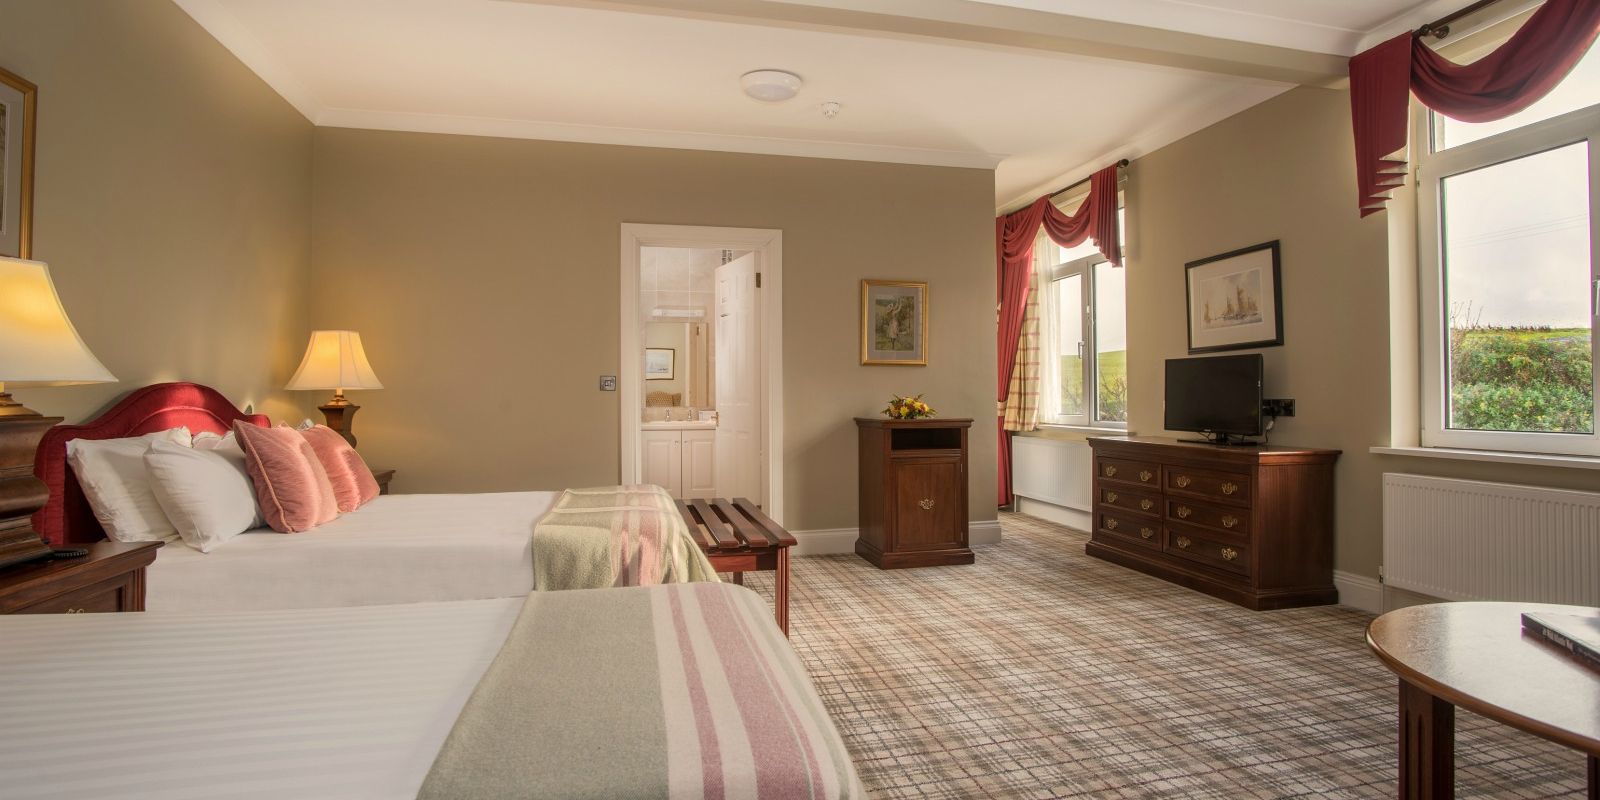 Interior view of a twin double-bed room at Rosapenna Golf Resort, Ireland